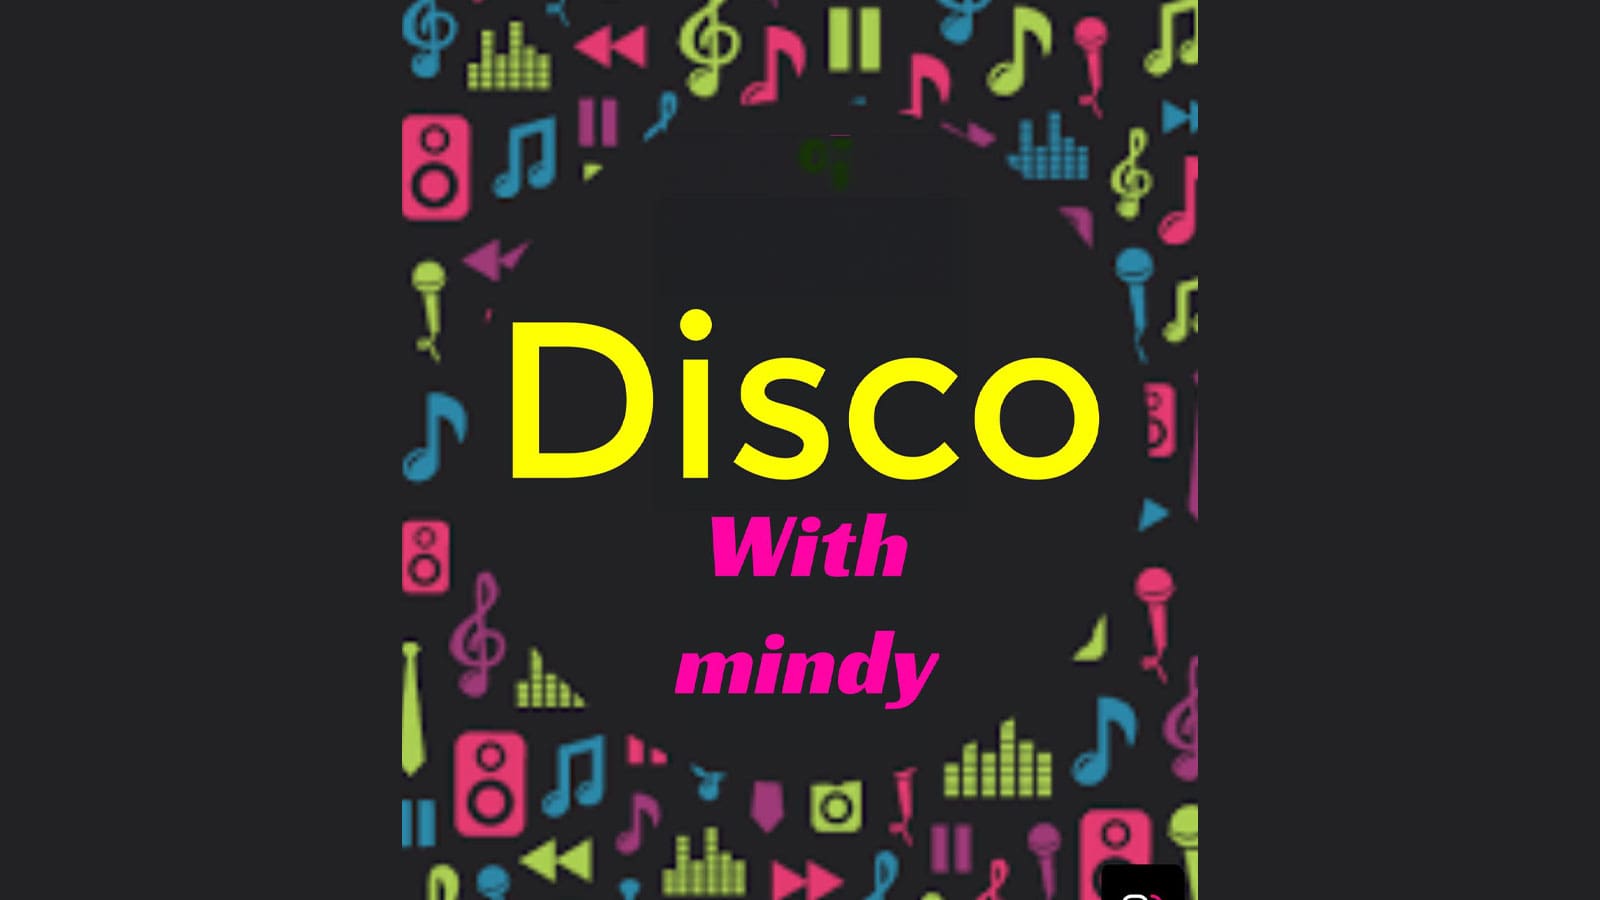 Thetford Bubbly Hub what's on and events The Albion Mindy Disco